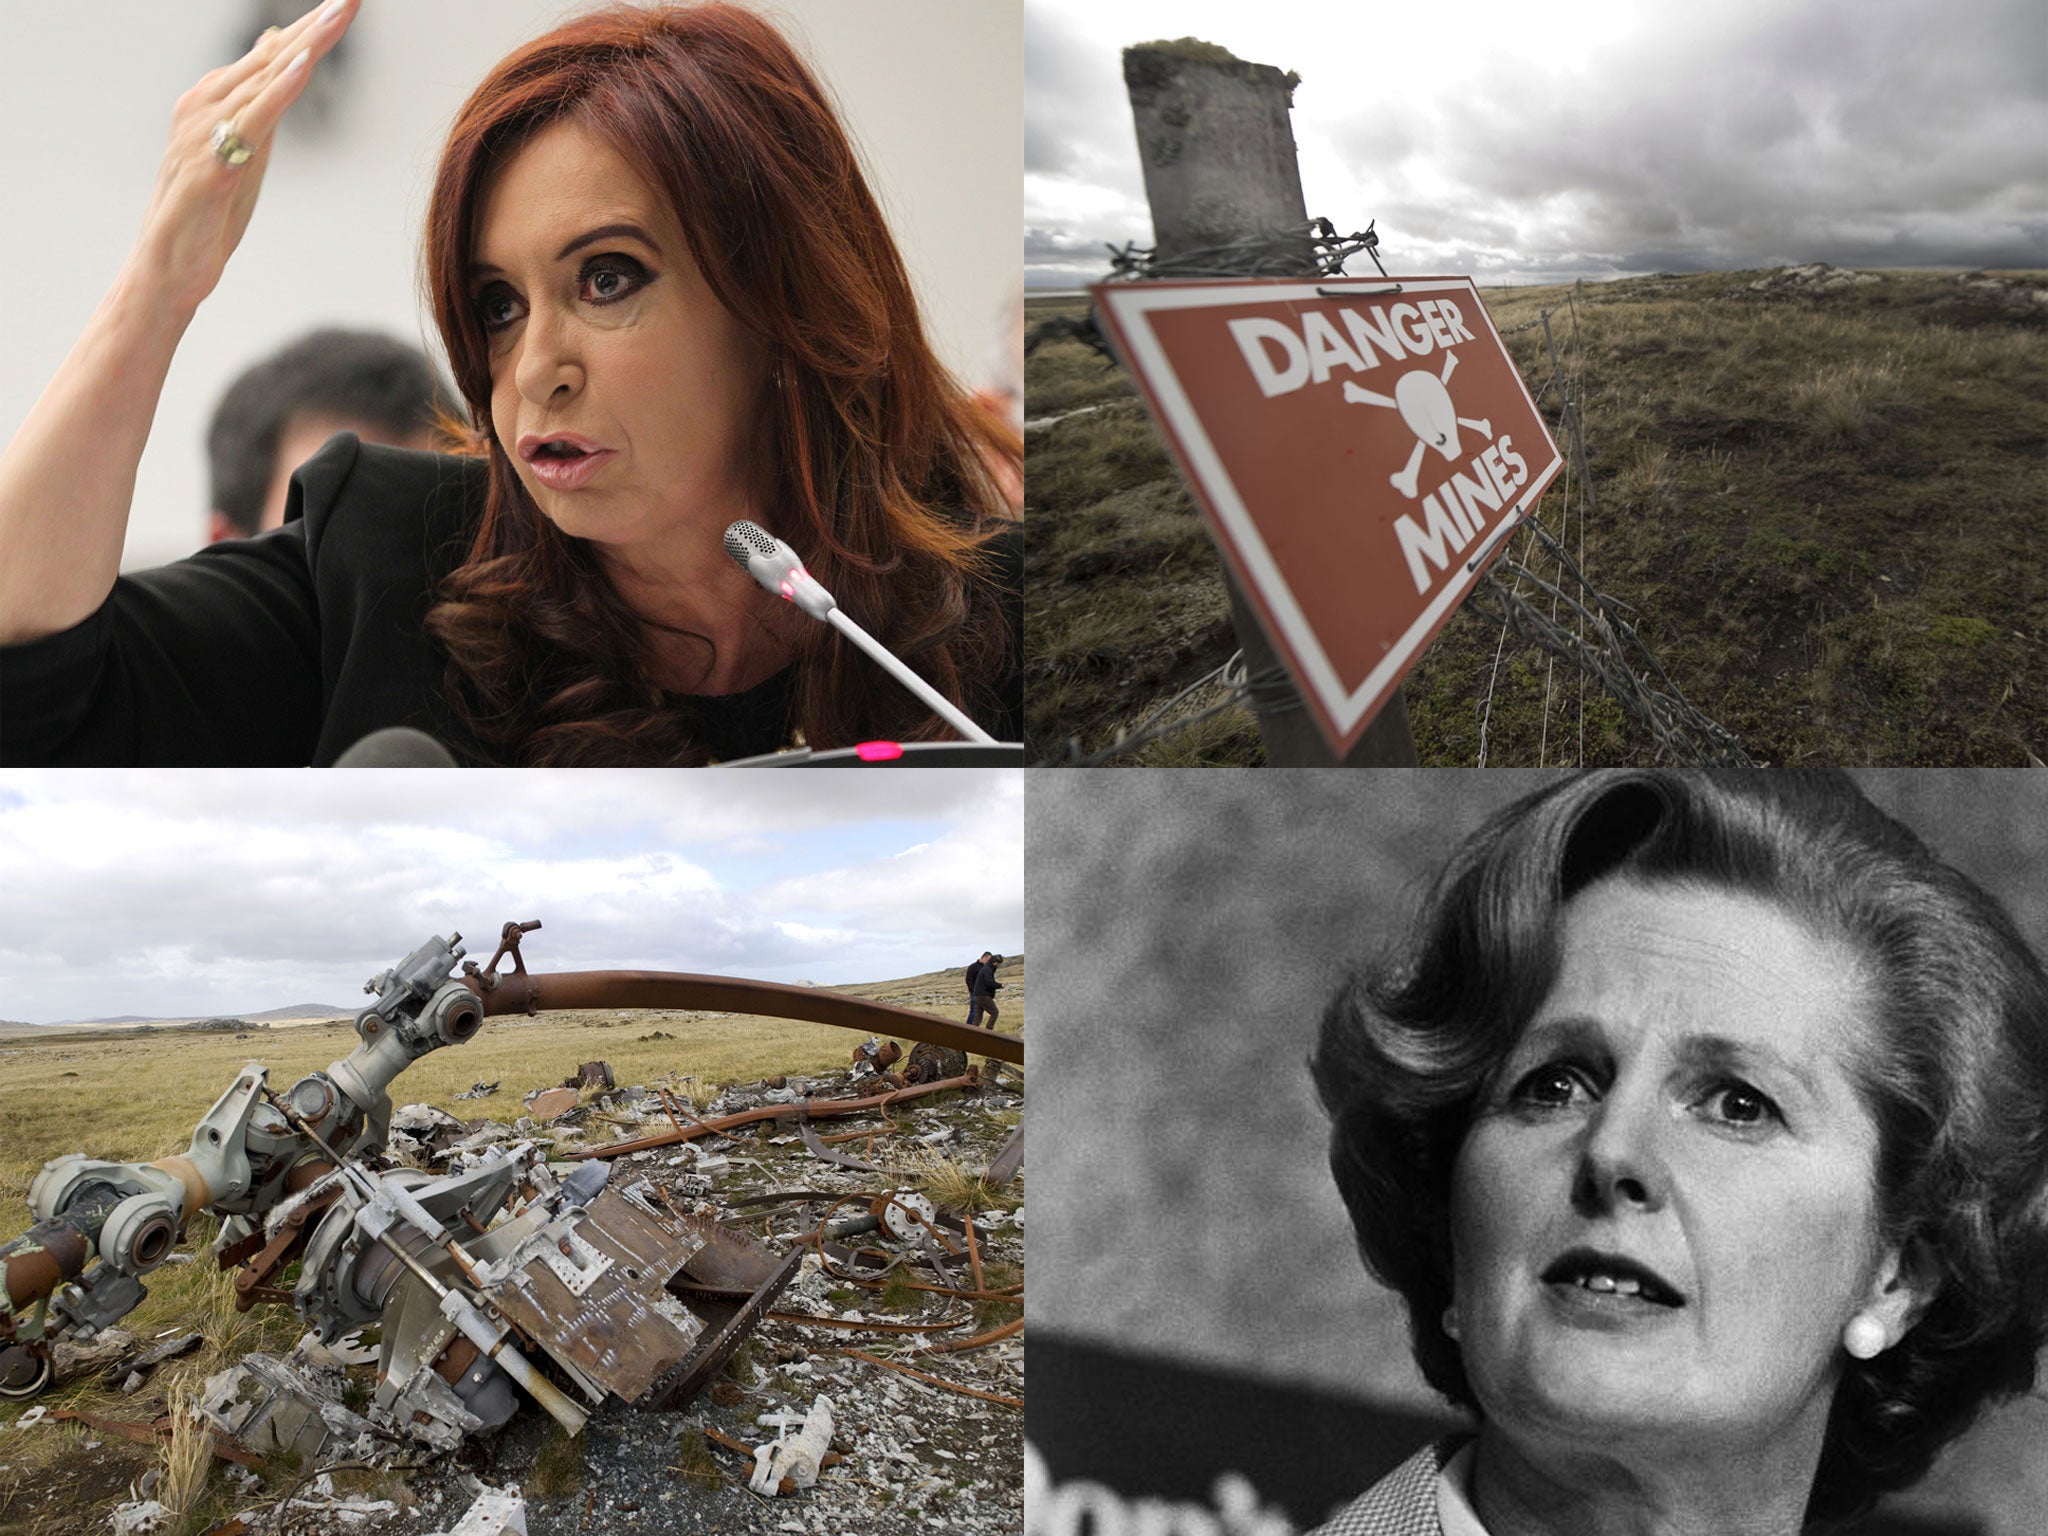 Clockwise from left: Cristina Fernandez de Kirchner, a land mine warning sign, Margaret Thatcher, who ordered the invasion of the Falklands, view of the wreckage of an Argentine helicopter